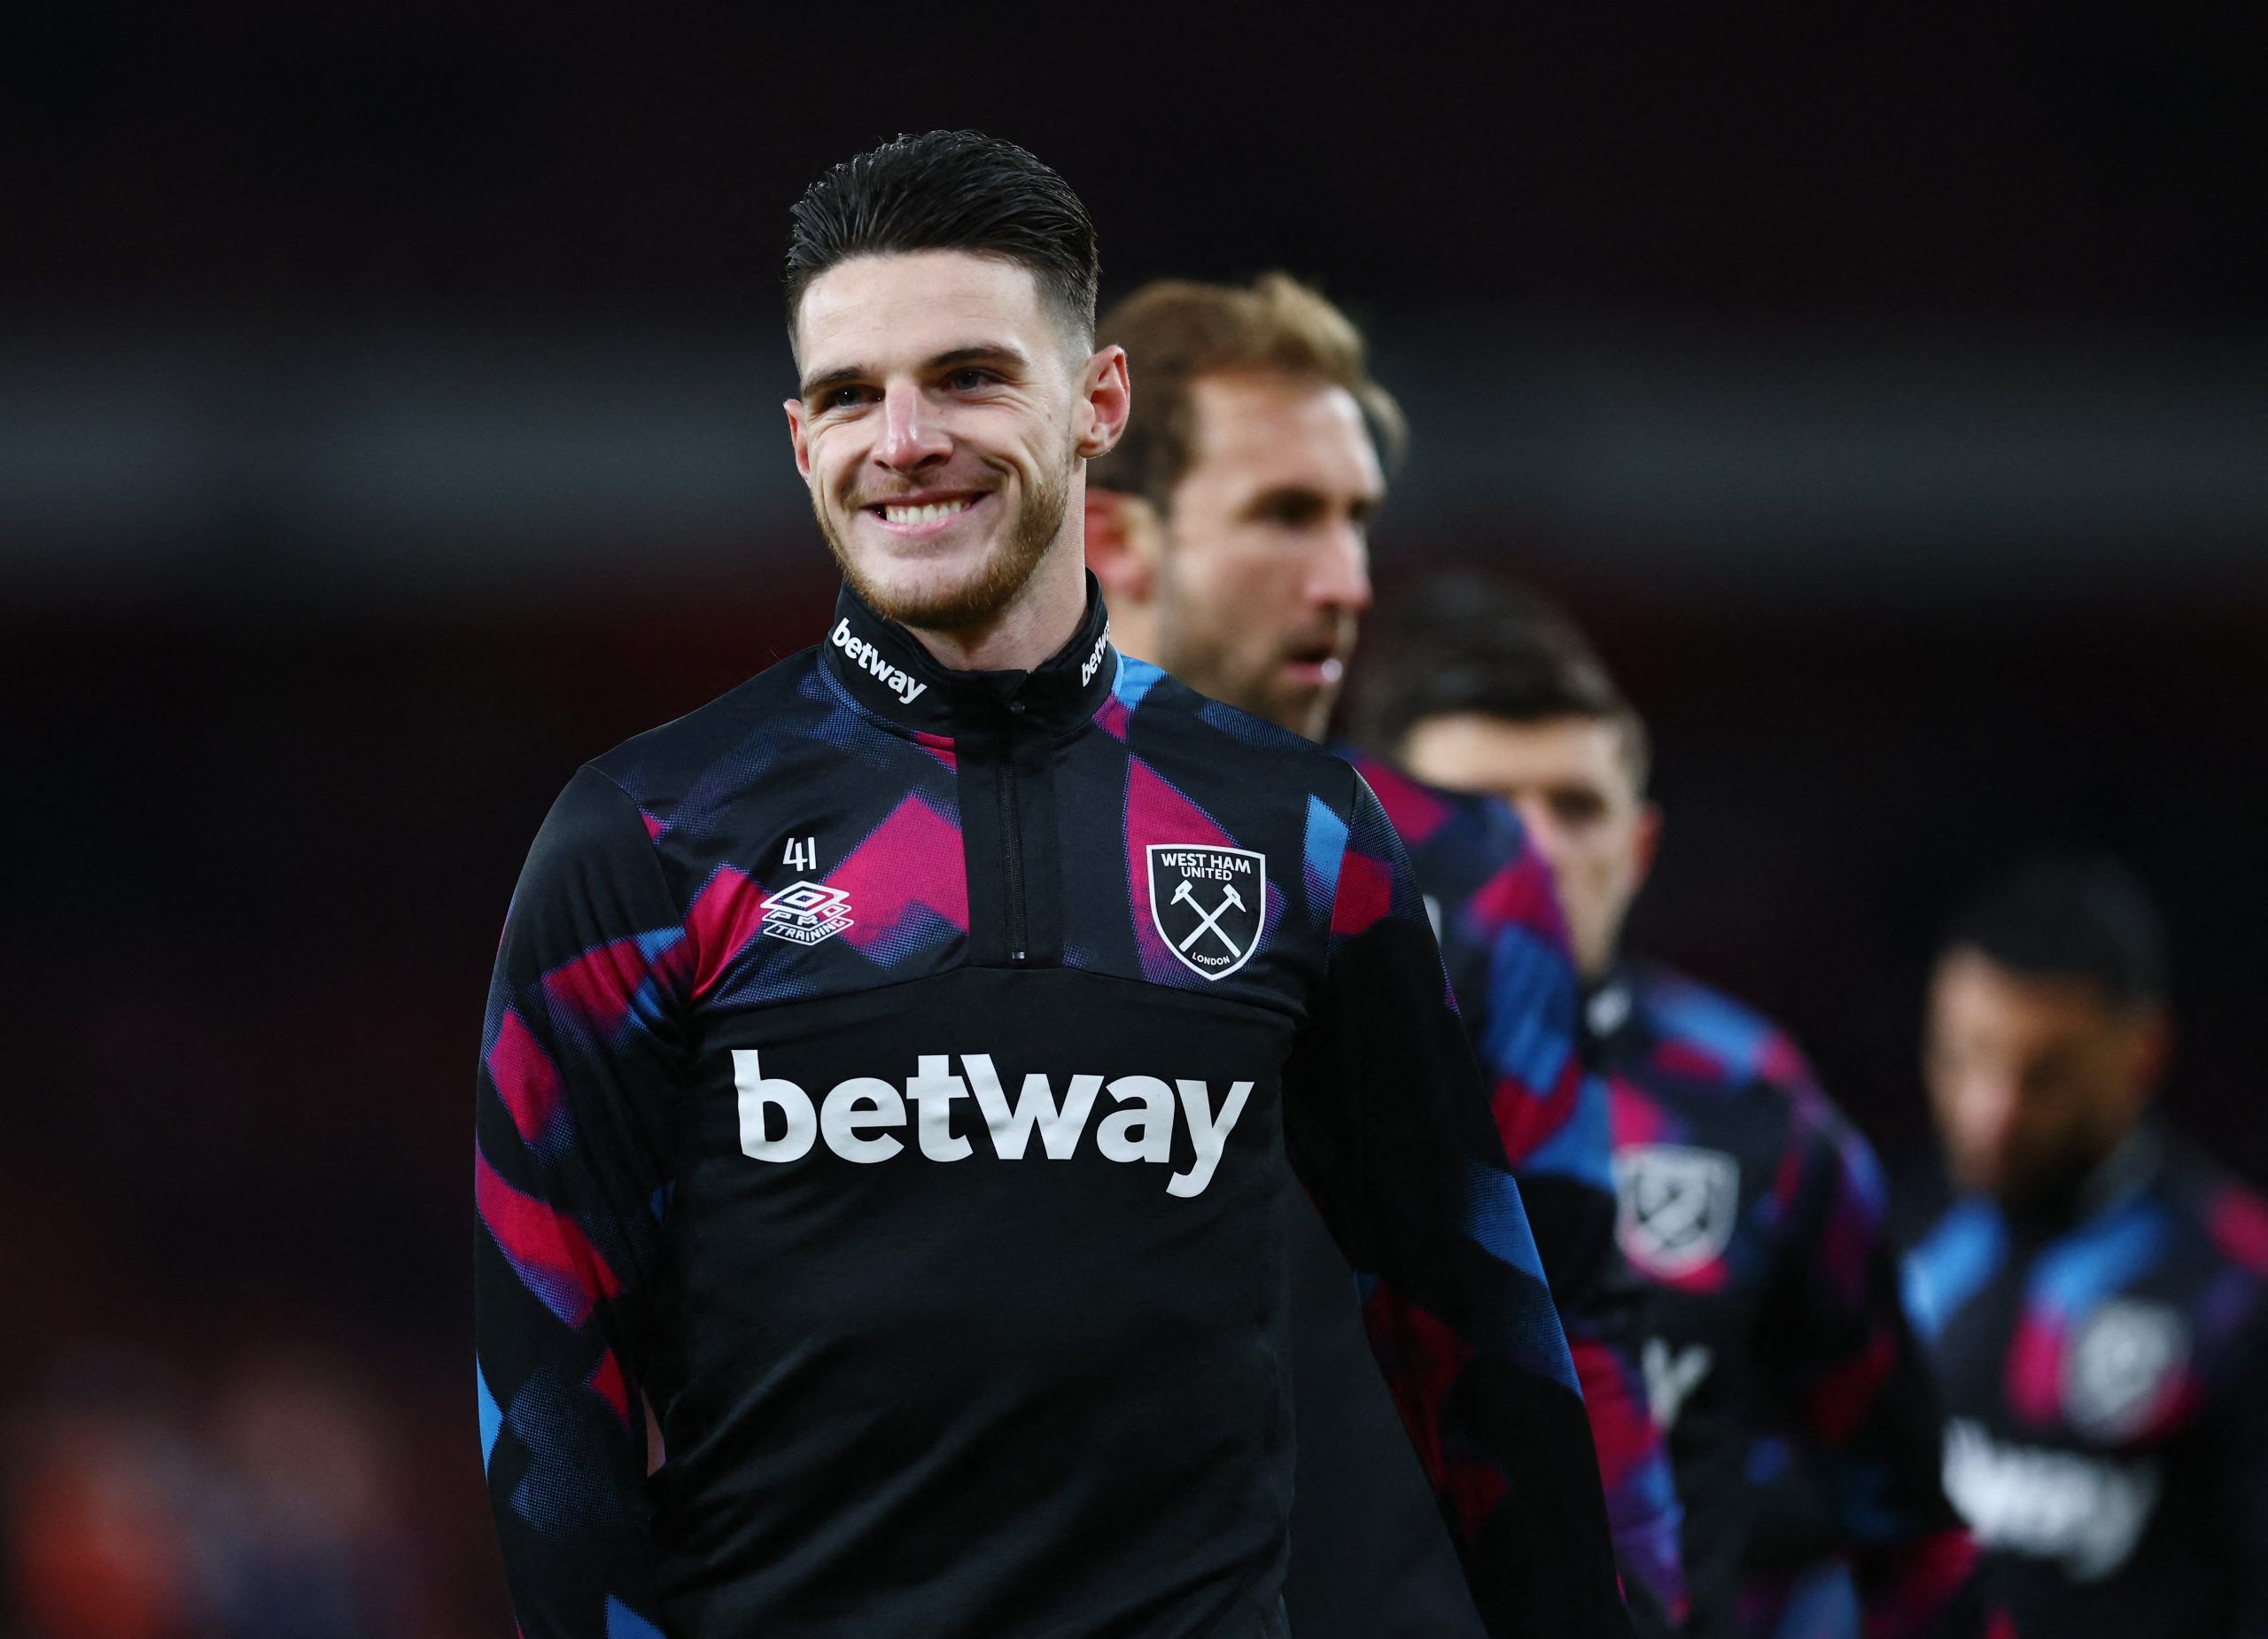 West Ham United's Declan Rice during the warm up before the match vs Arsenal